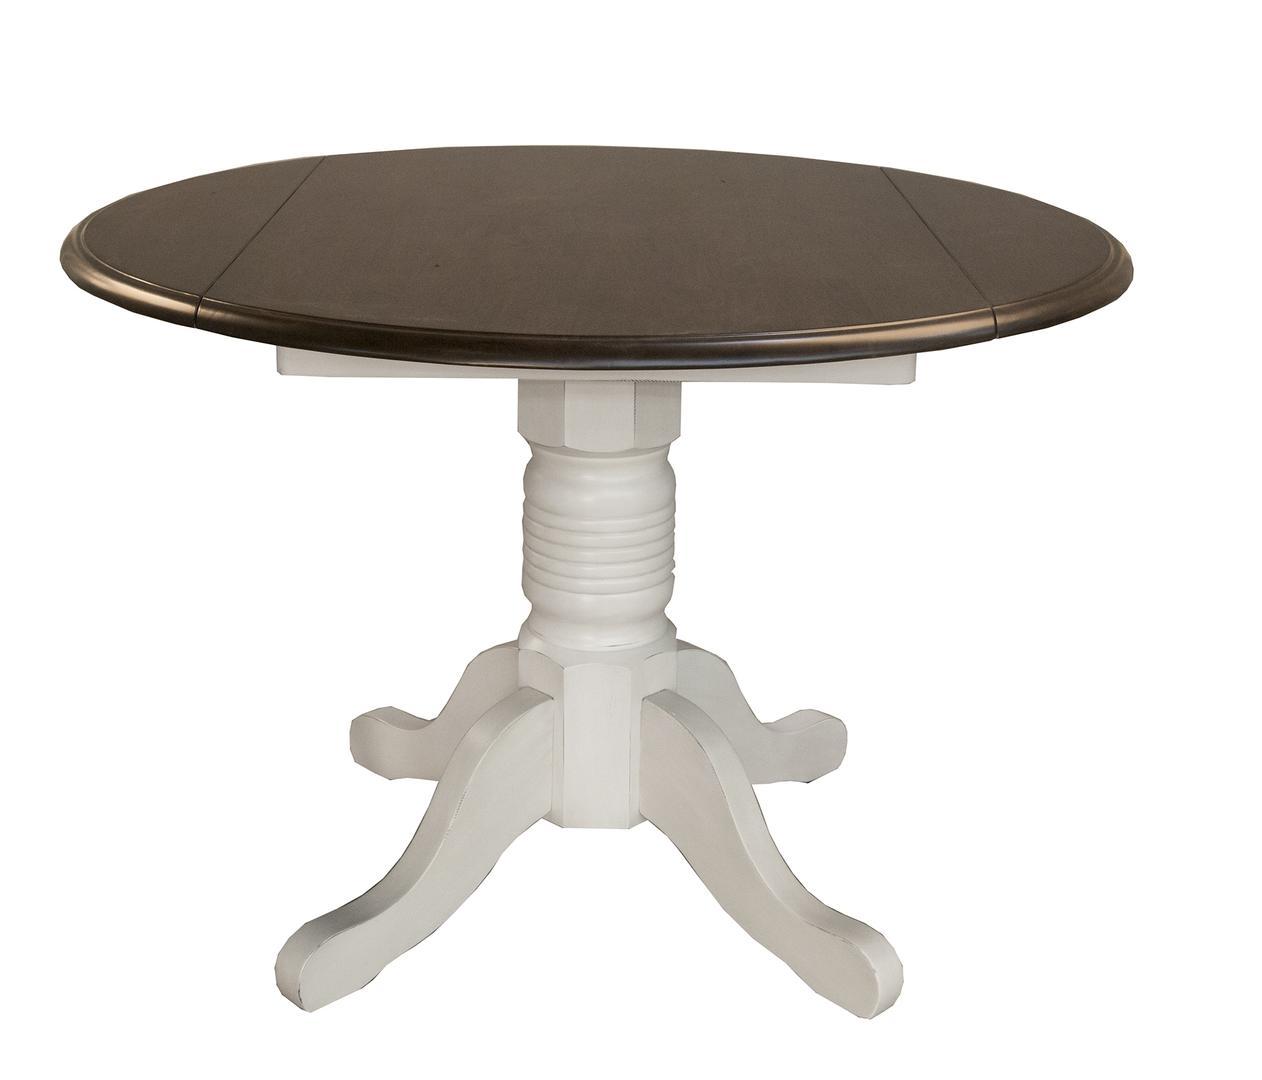 Rustic Dining Table British Isles CO BRICO6100 in Brown, White 